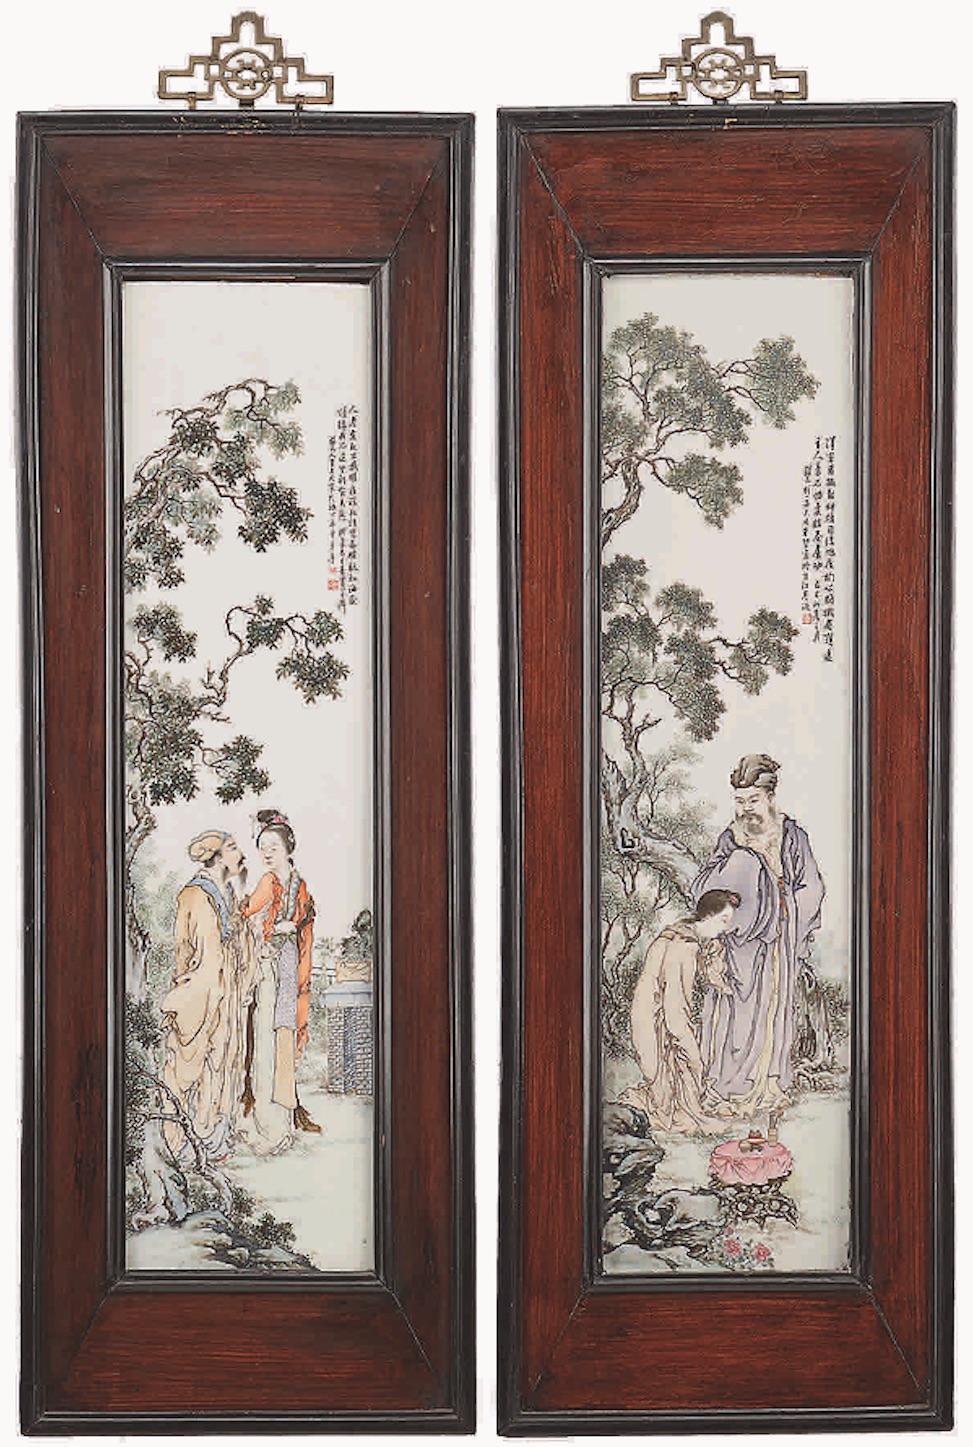 Porcelain Plaques By Wang Dafan Realized $118,500.